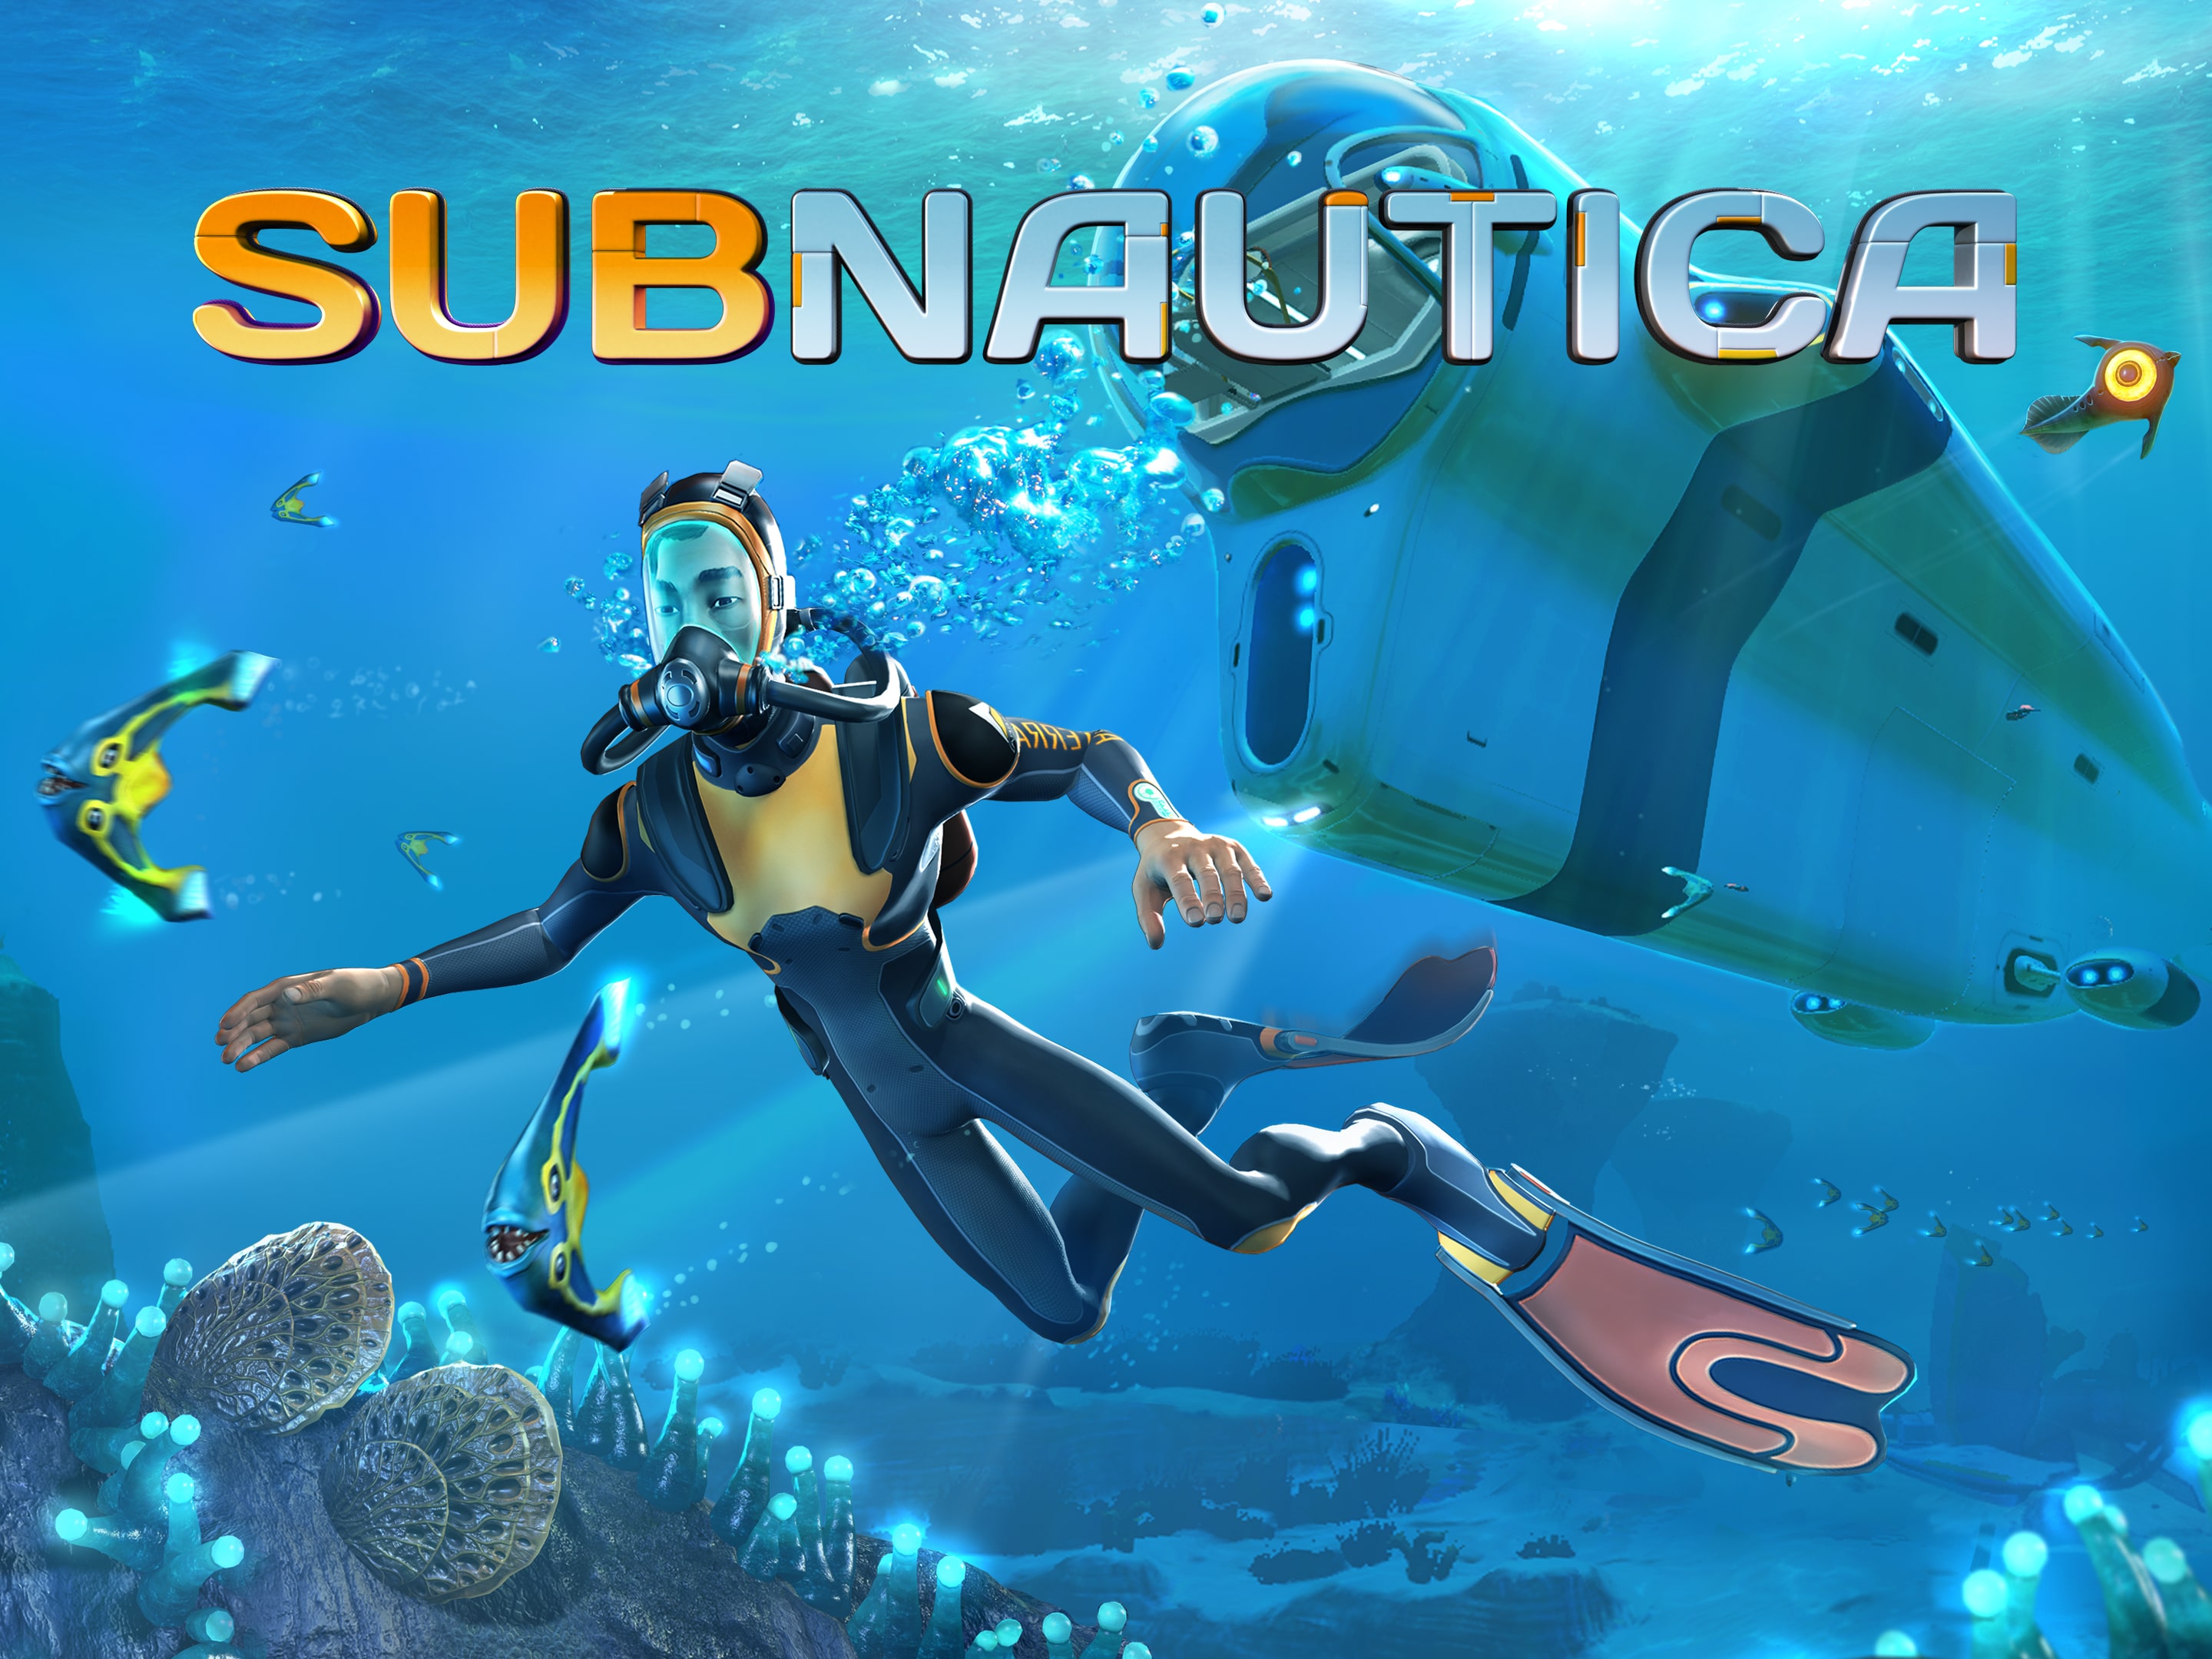 AQUANAUT - Play Online for Free!